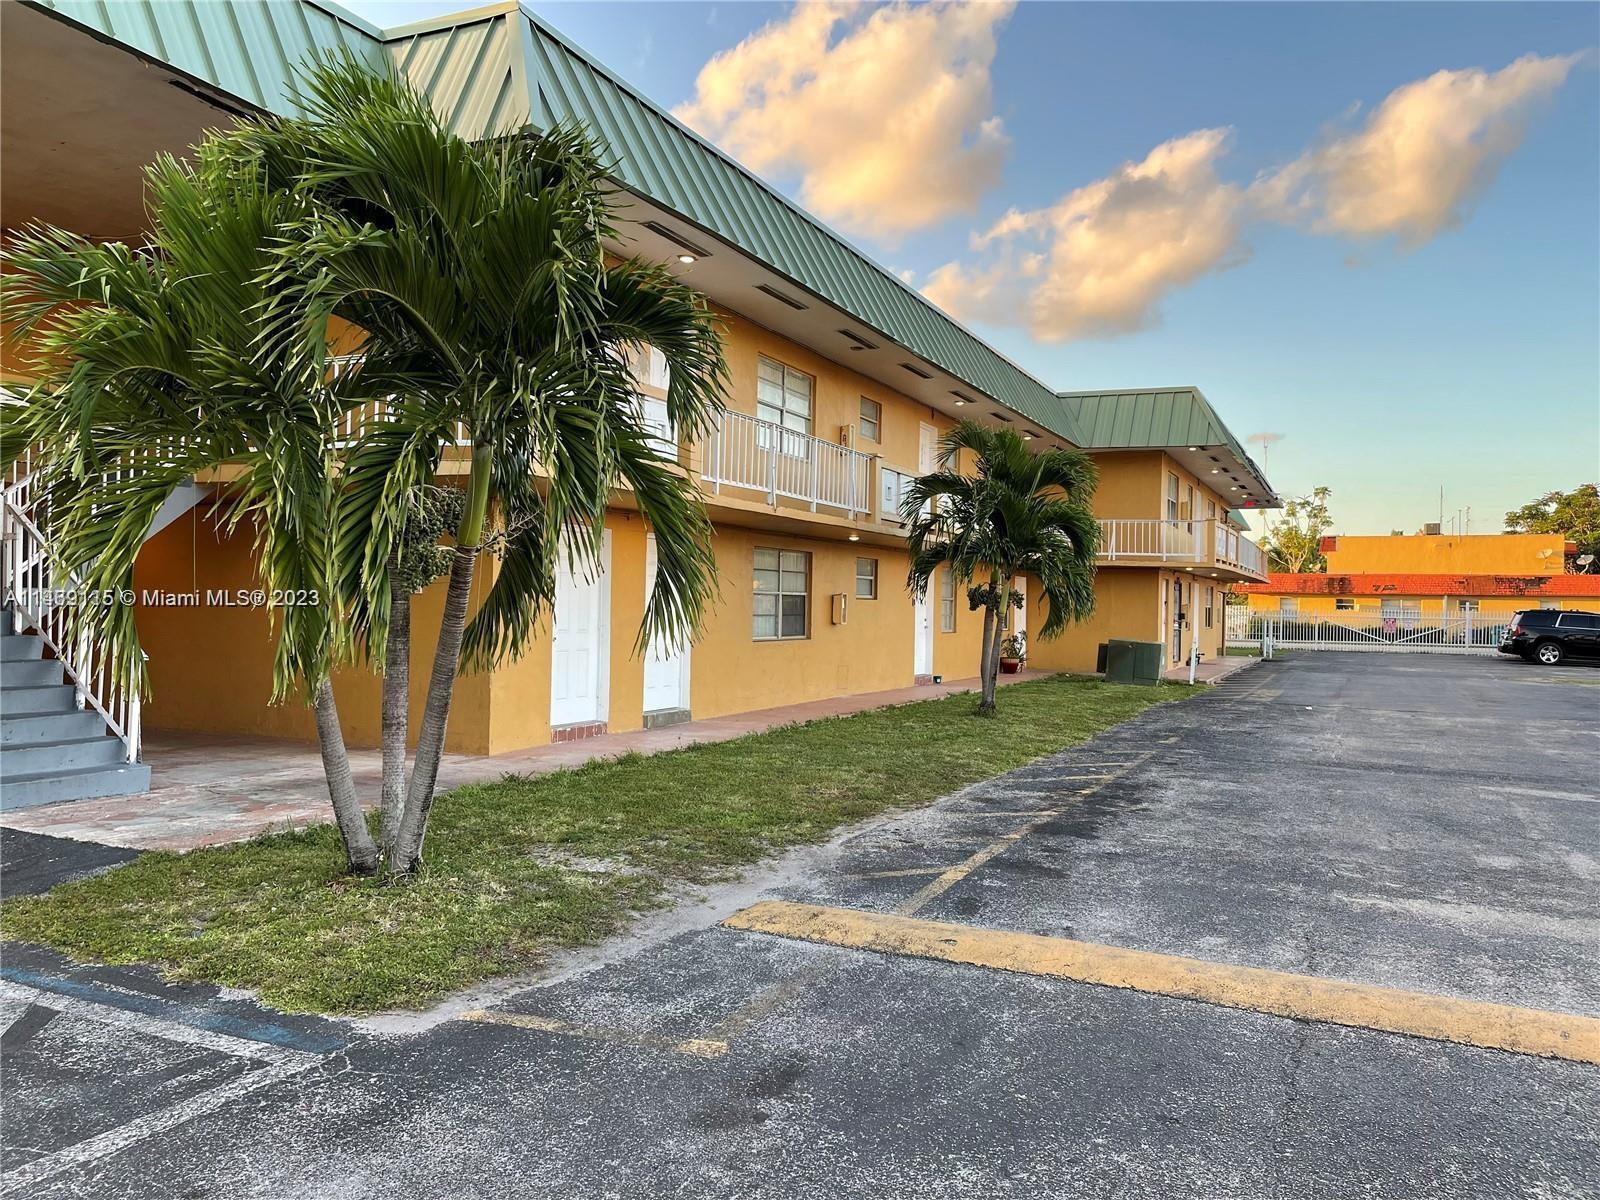 Photo of 505 NW 177th St #243 in Miami Gardens, FL